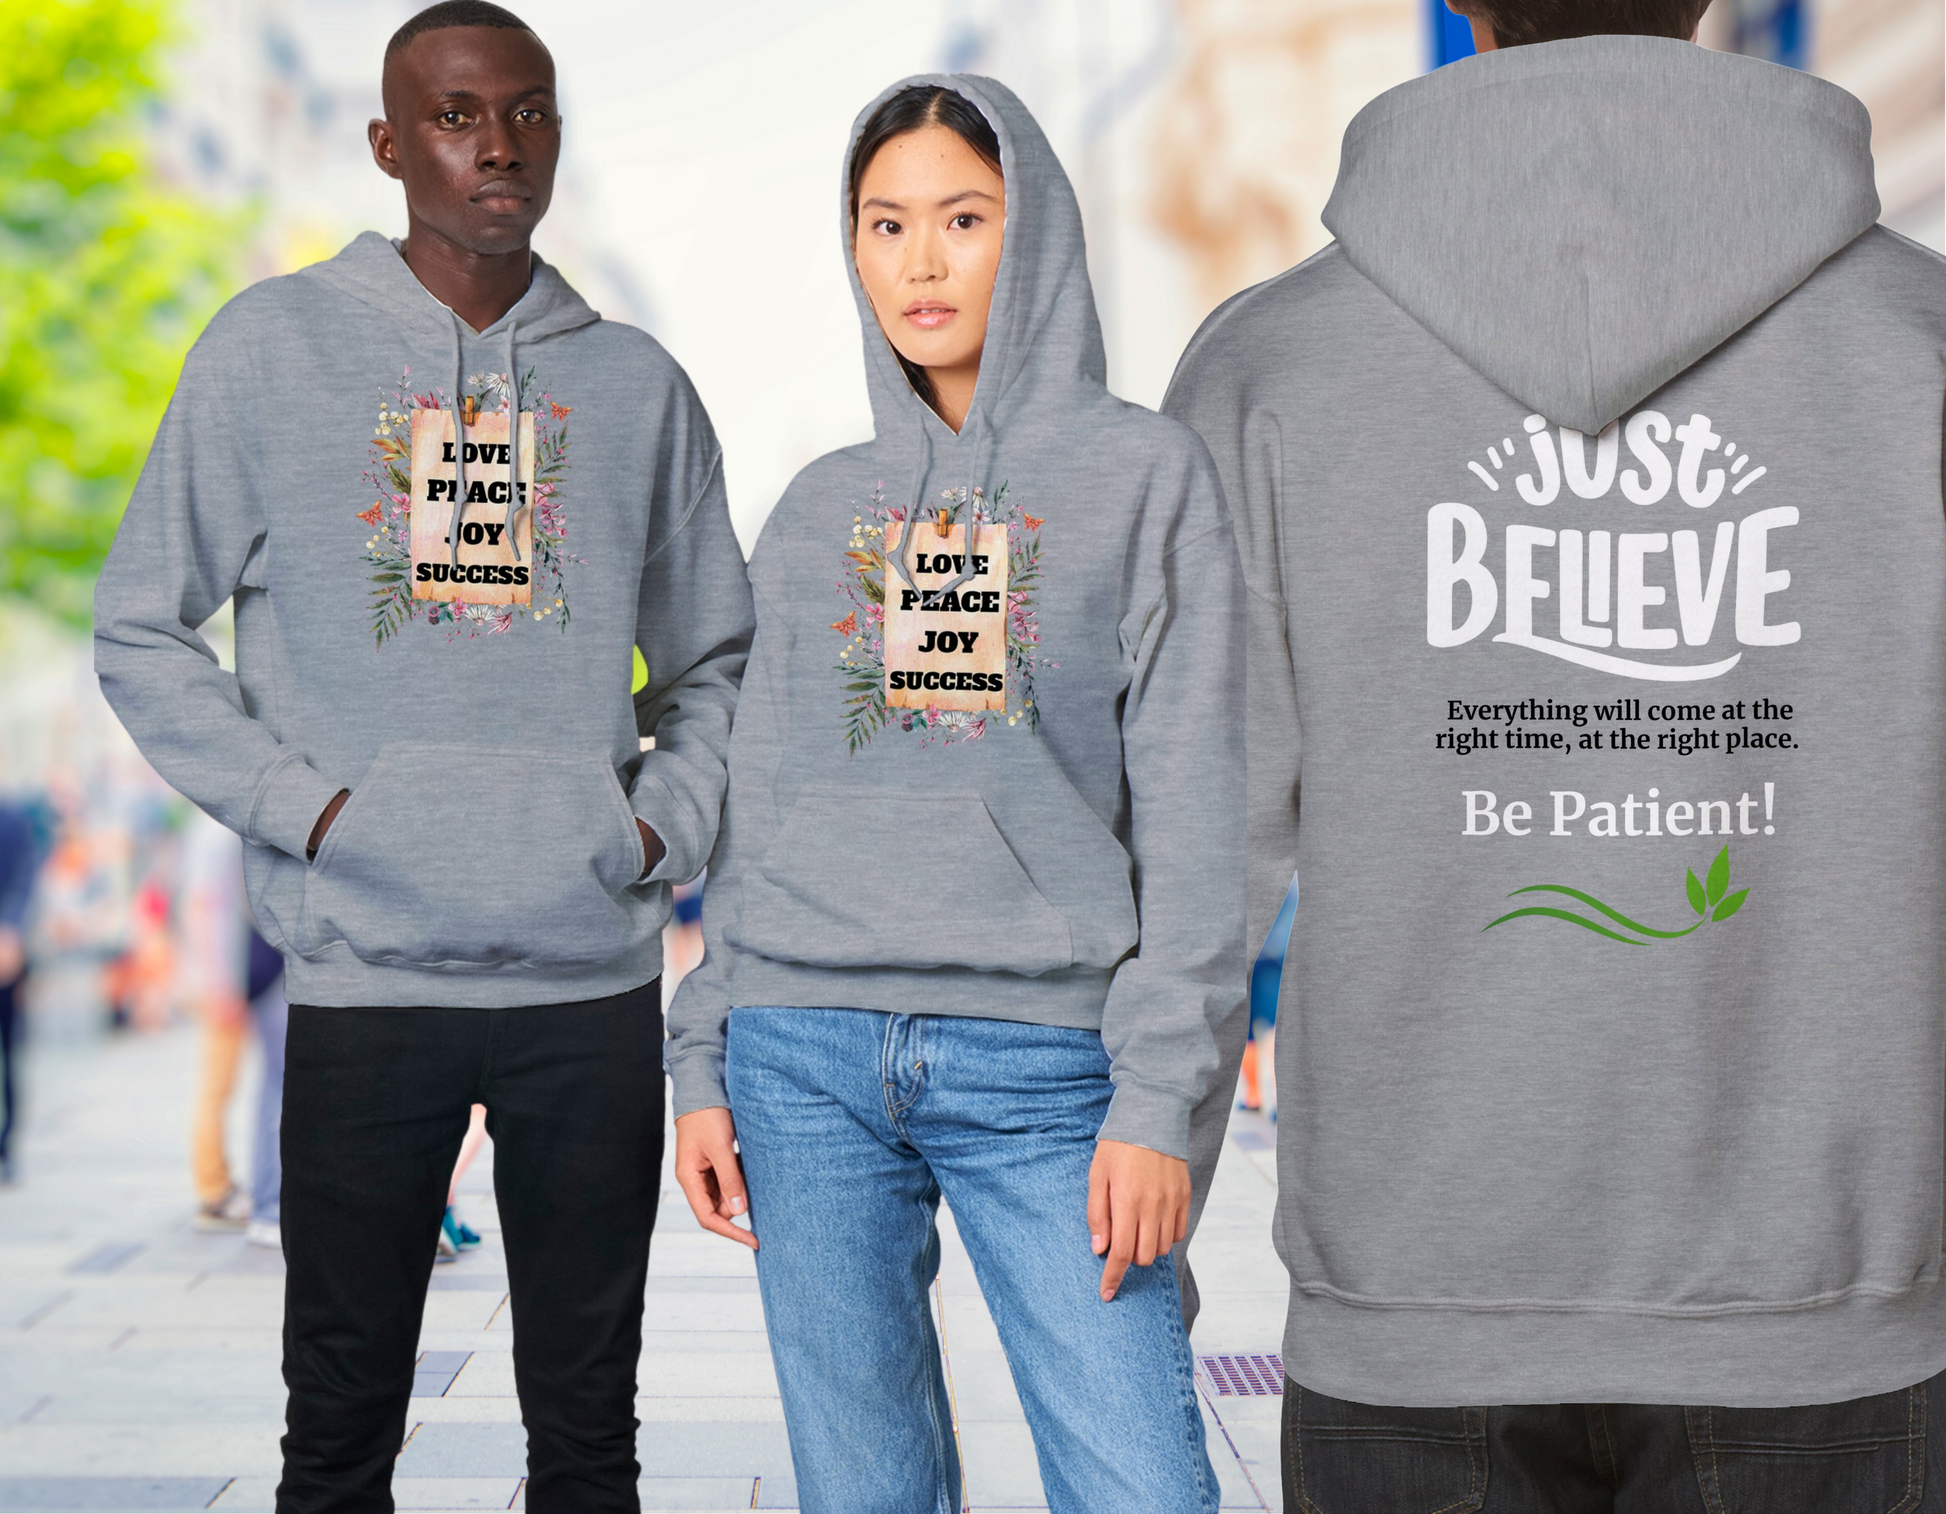 Cottagecore Unisex Hoddie, with positive Words: Love, Peace, Joy and Success. In the back: Just Believe everything will come at the right time and the right place. Be patient!Positive Quote Top, Vintage Jumper Gift Idea - grey hoodie